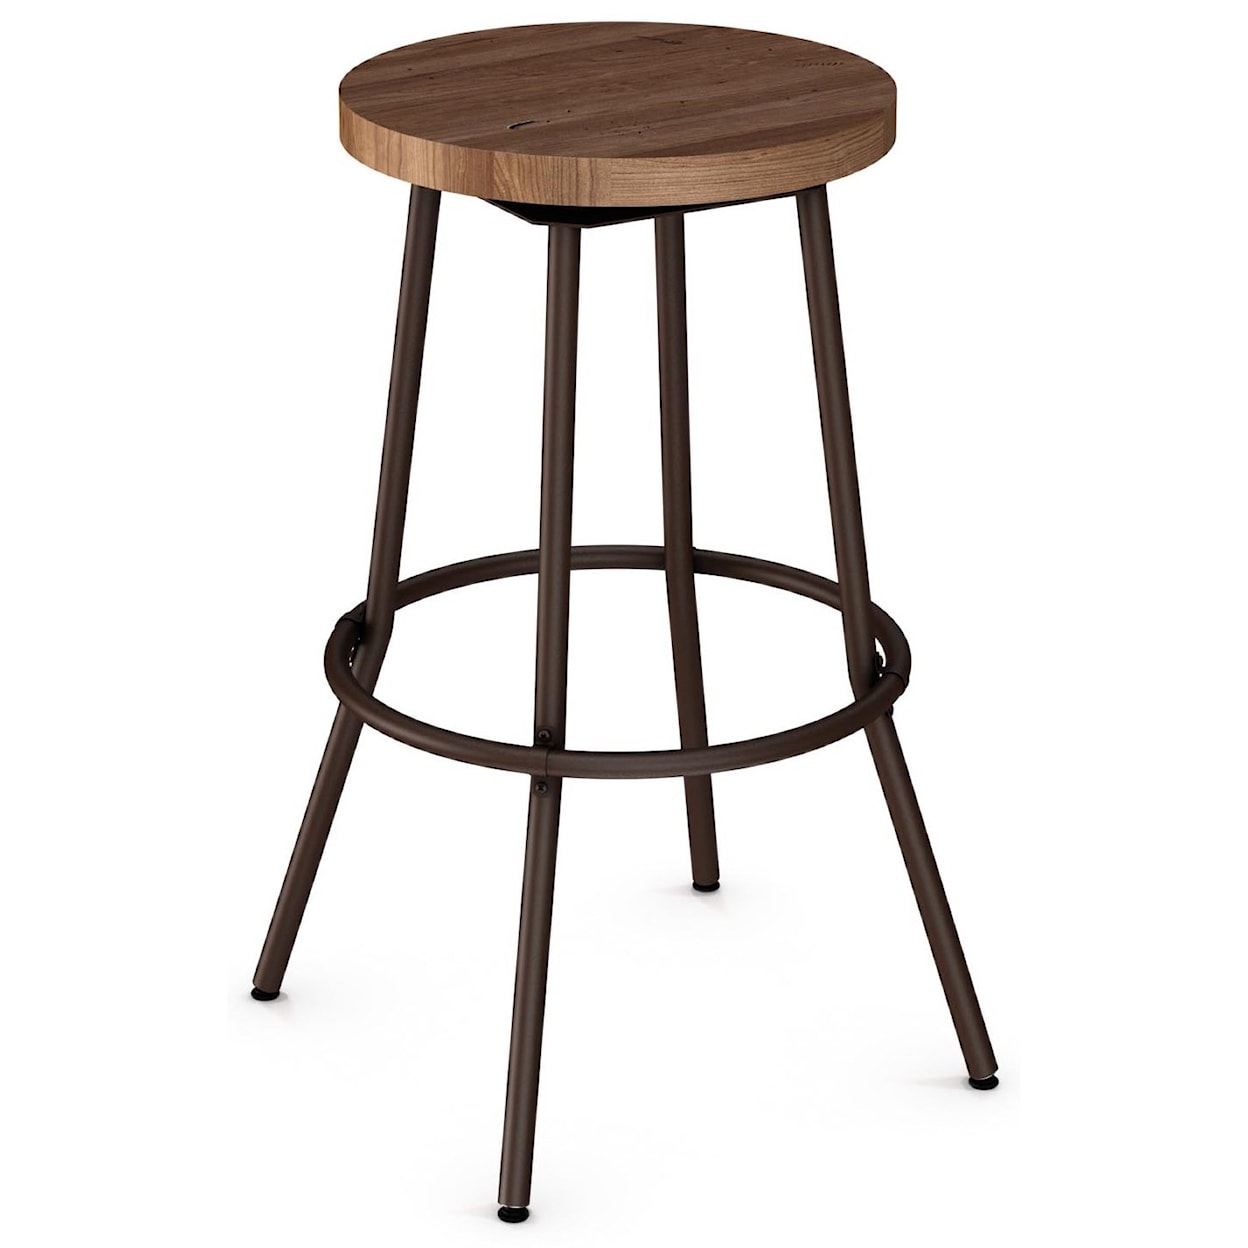 Amisco Industrial 30" Bluffton Swivel Stool Without Backrest